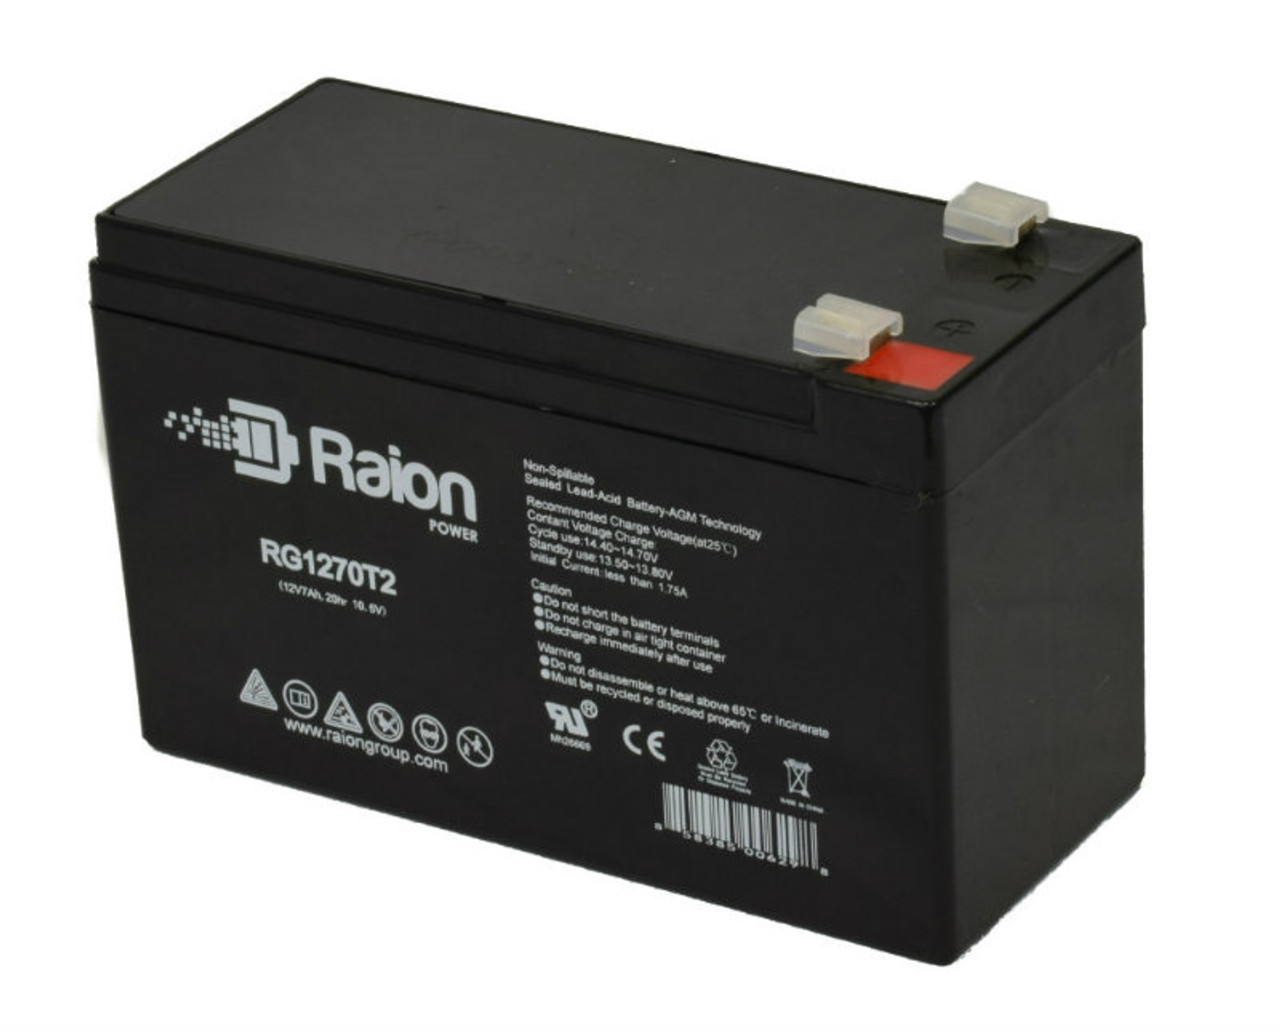 Raion Power RG1270T1 12V 7Ah Non-Spillable Replacement Battery for FirstPower FP1272